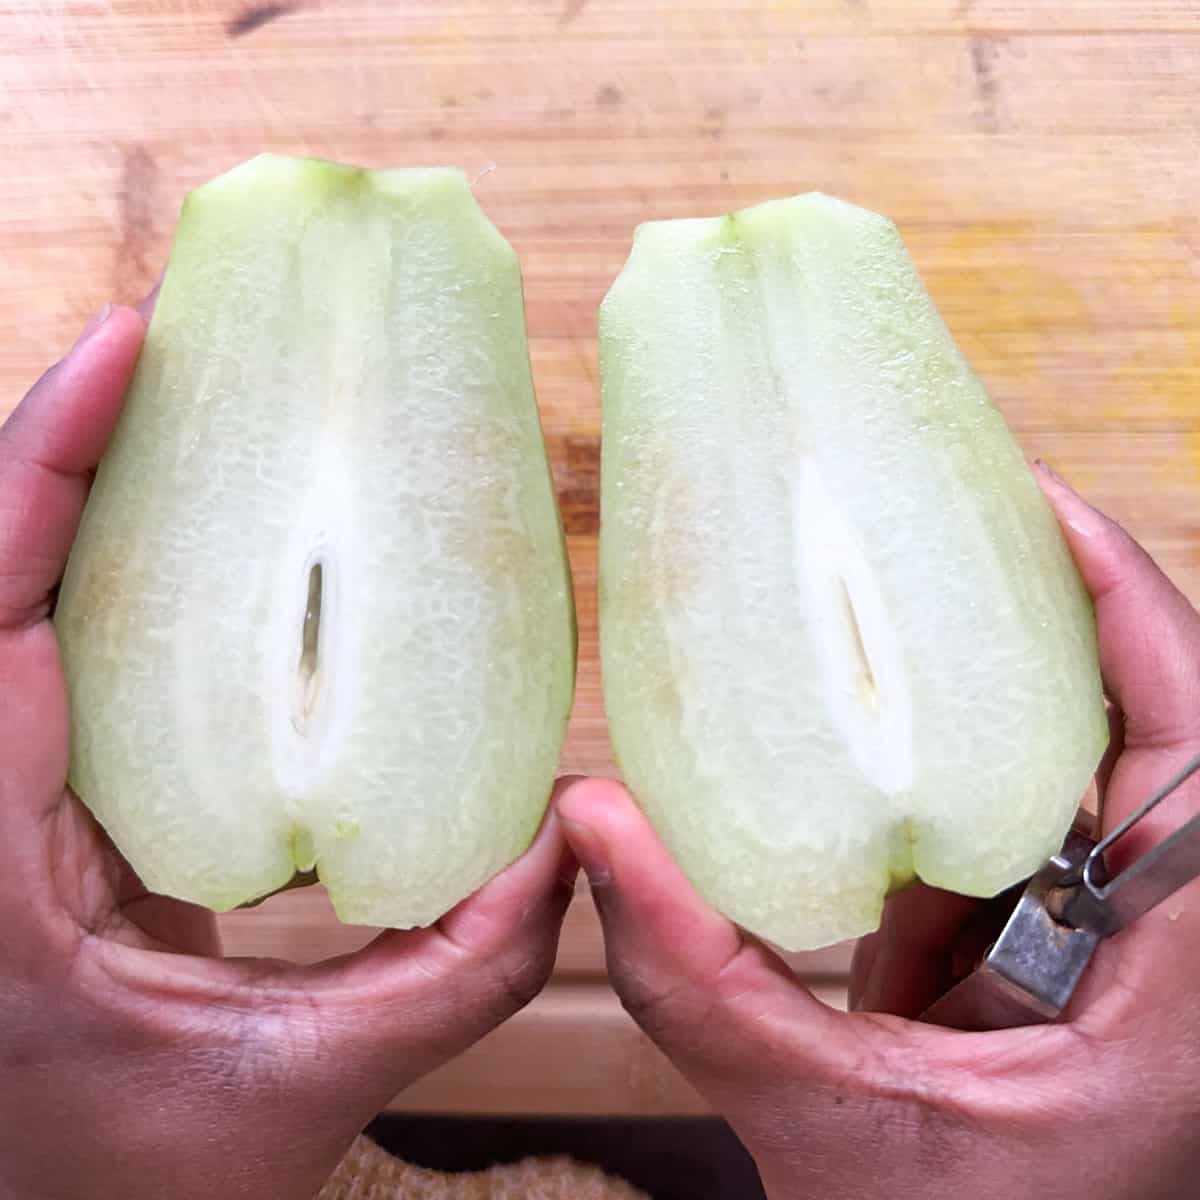 Chayote squash cut down vertically in the center.